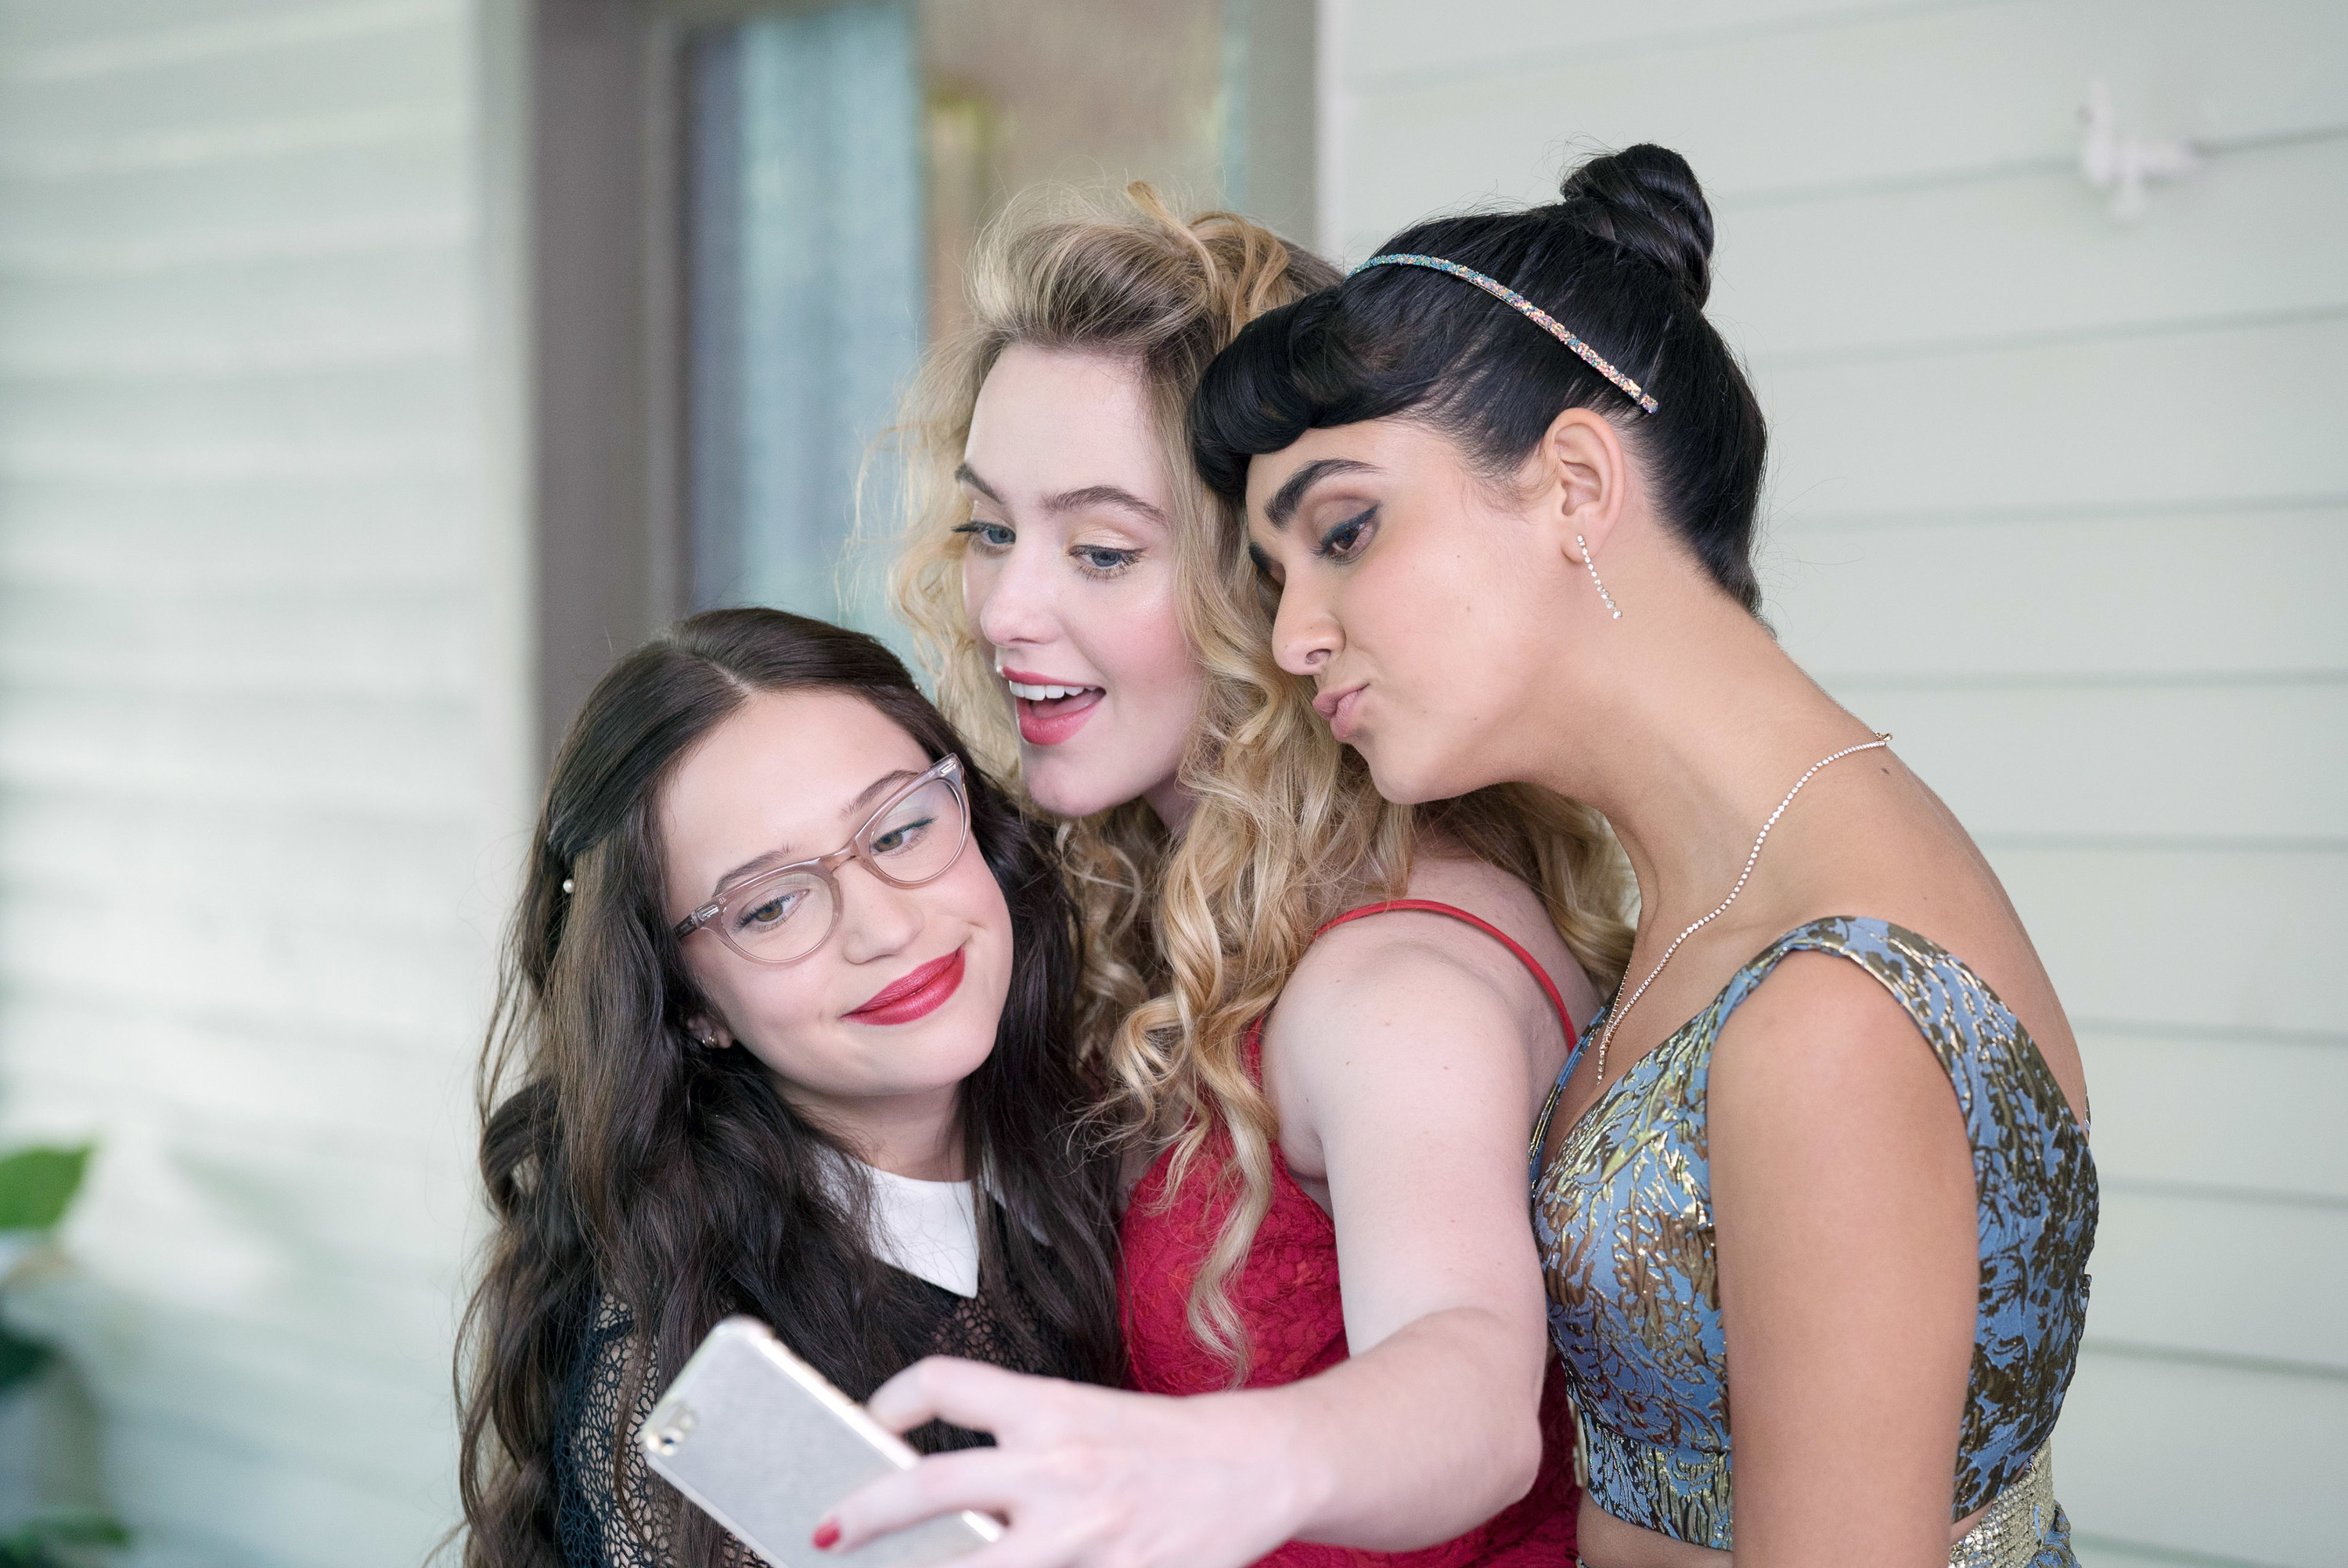 The three main characters take a selfie in their prom looks